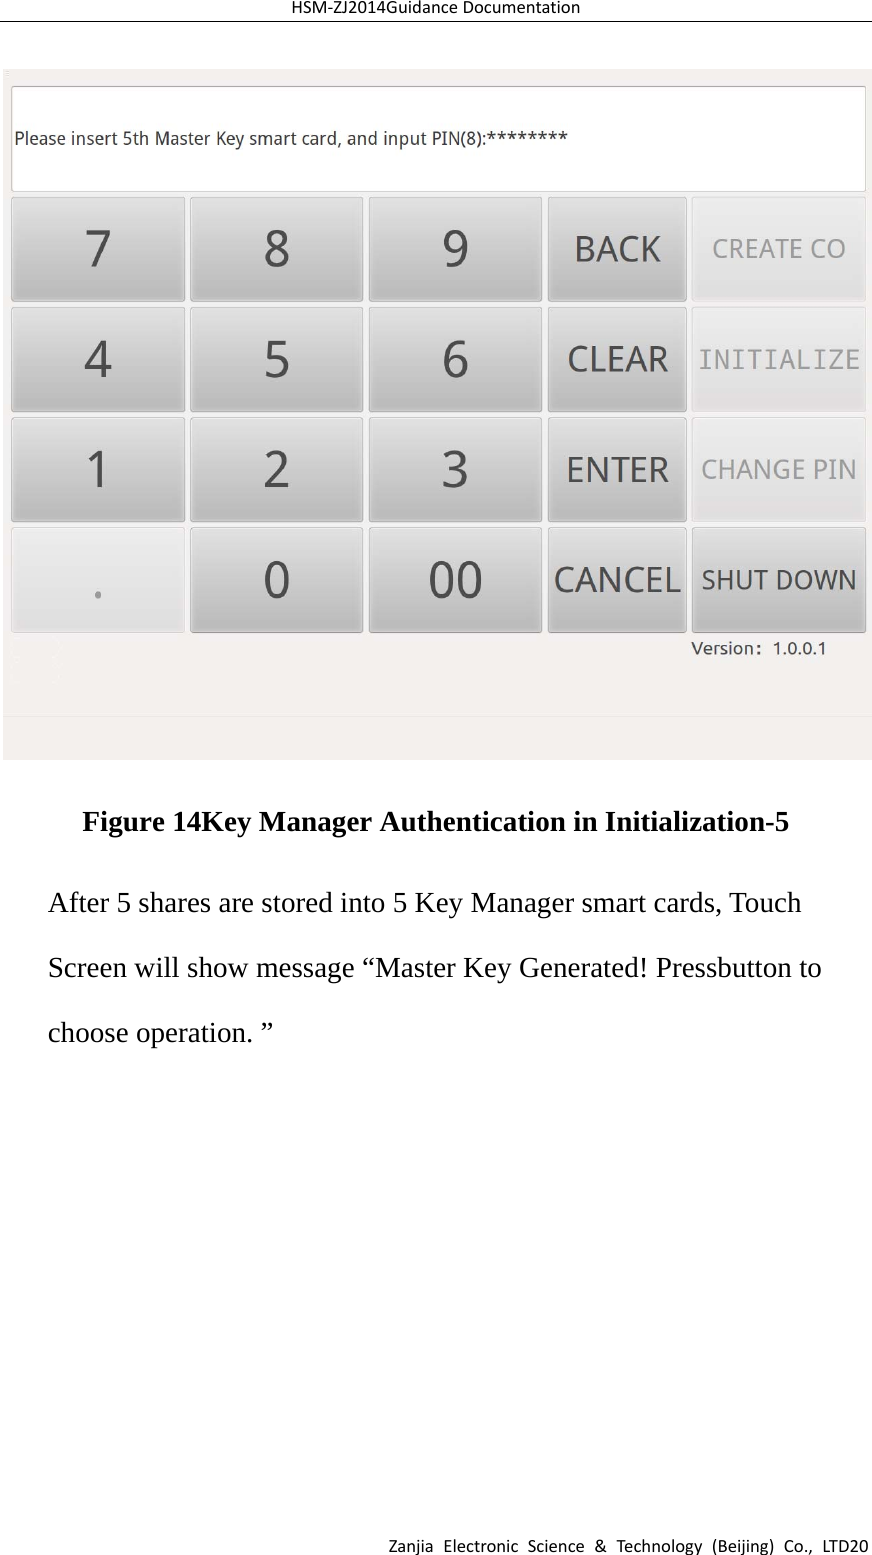 HSM‐ZJ2014GuidanceDocumentationZanjiaElectronicScience&amp;Technology(Beijing)Co.,LTD20Figure 14Key Manager Authentication in Initialization-5 After 5 shares are stored into 5 Key Manager smart cards, Touch Screen will show message “Master Key Generated! Pressbutton to choose operation. ”   